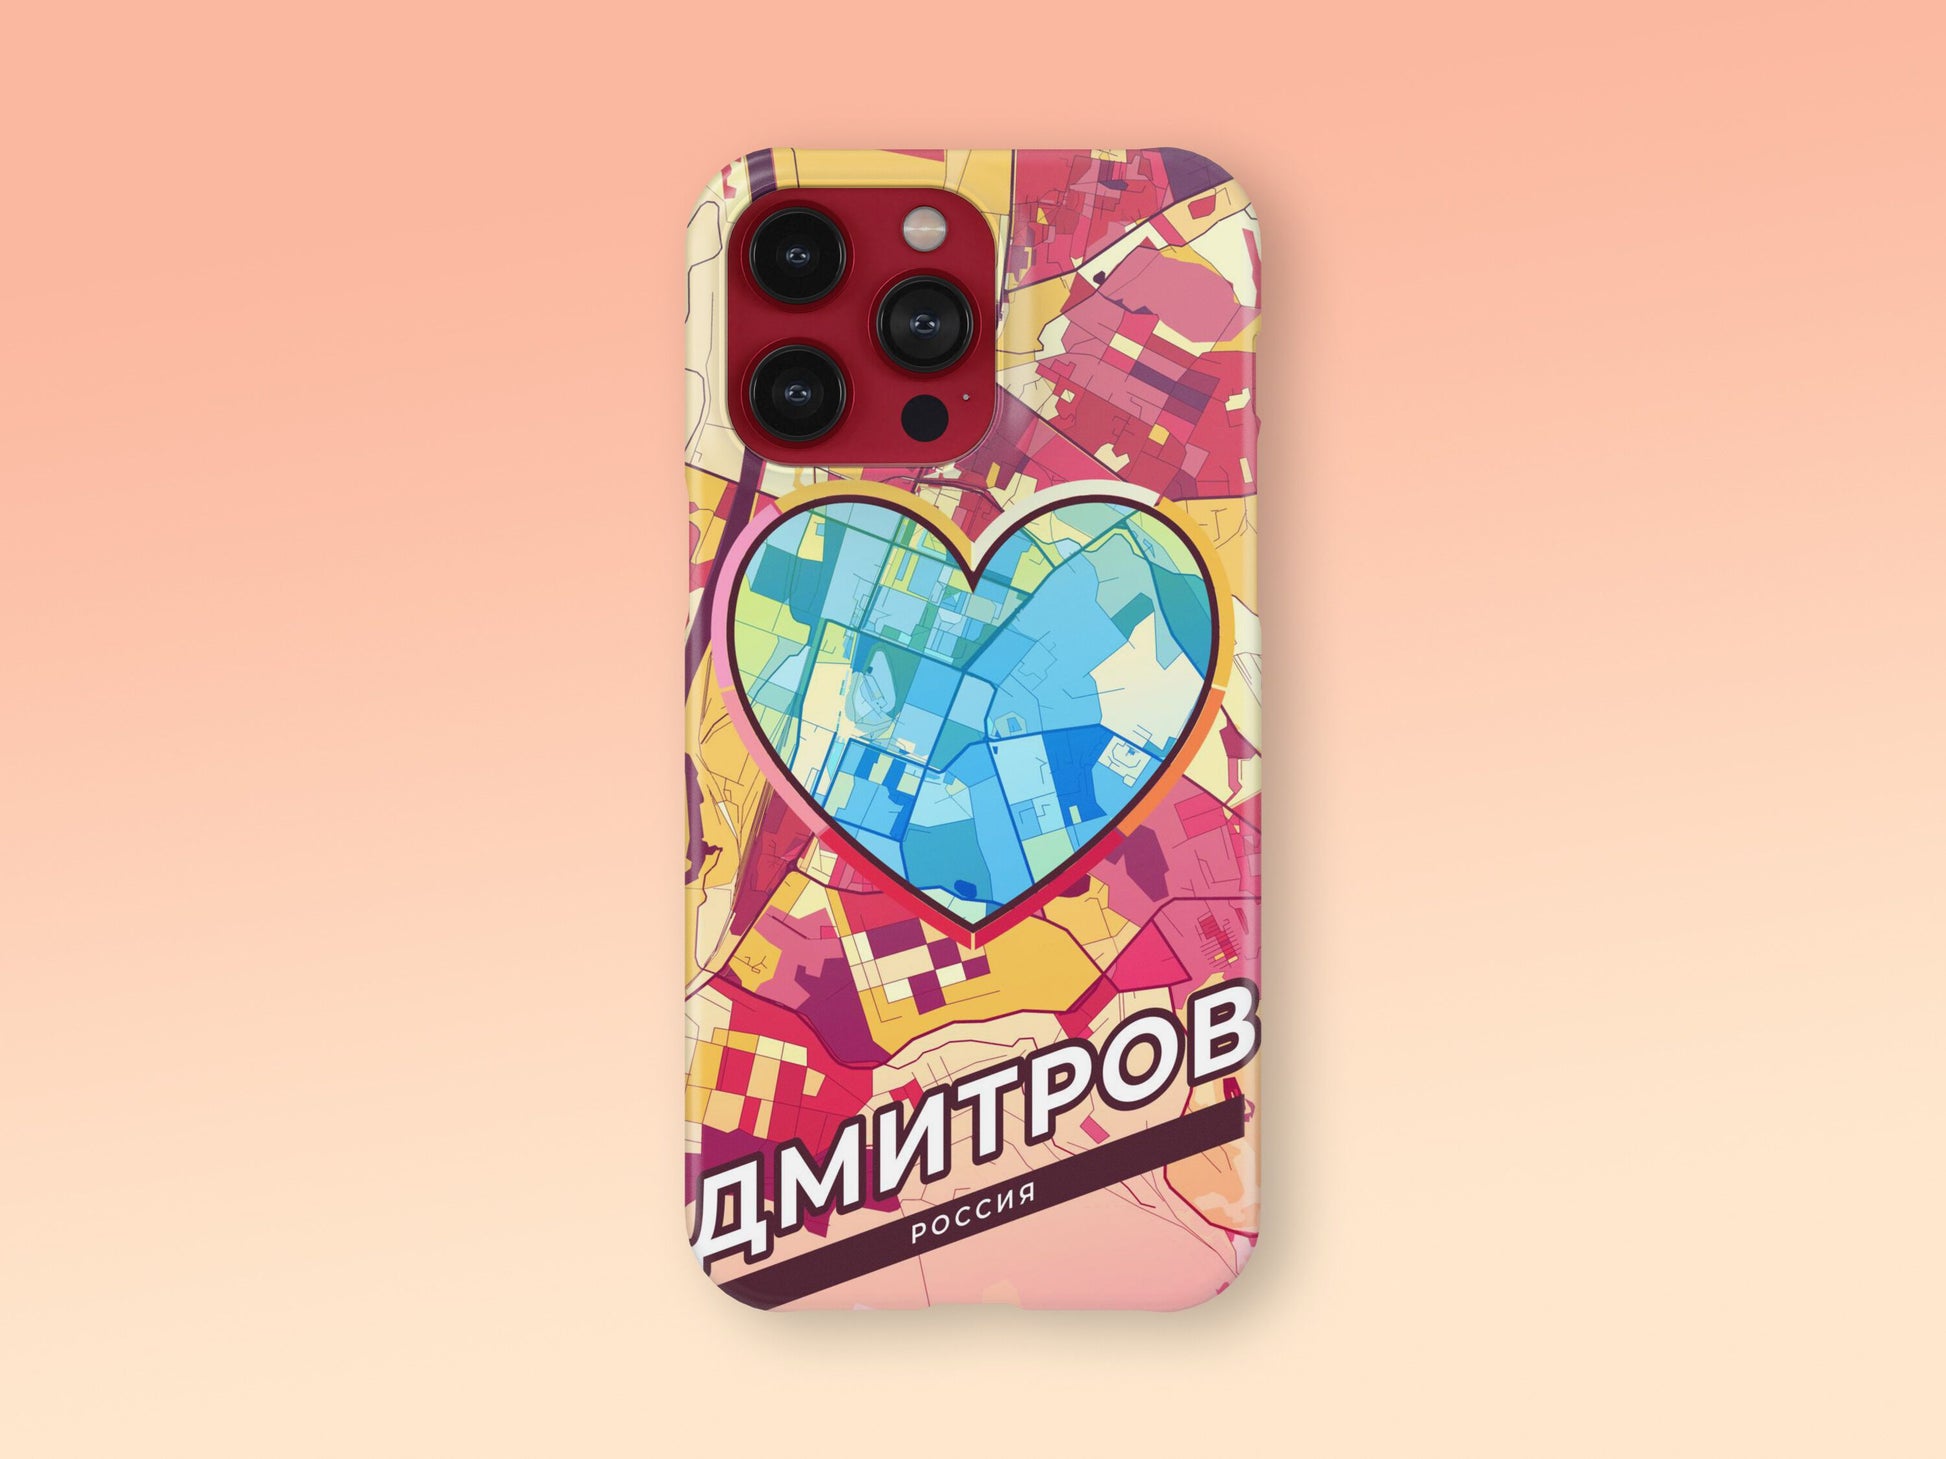 Dmitrov Russia slim phone case with colorful icon. Birthday, wedding or housewarming gift. Couple match cases. 2